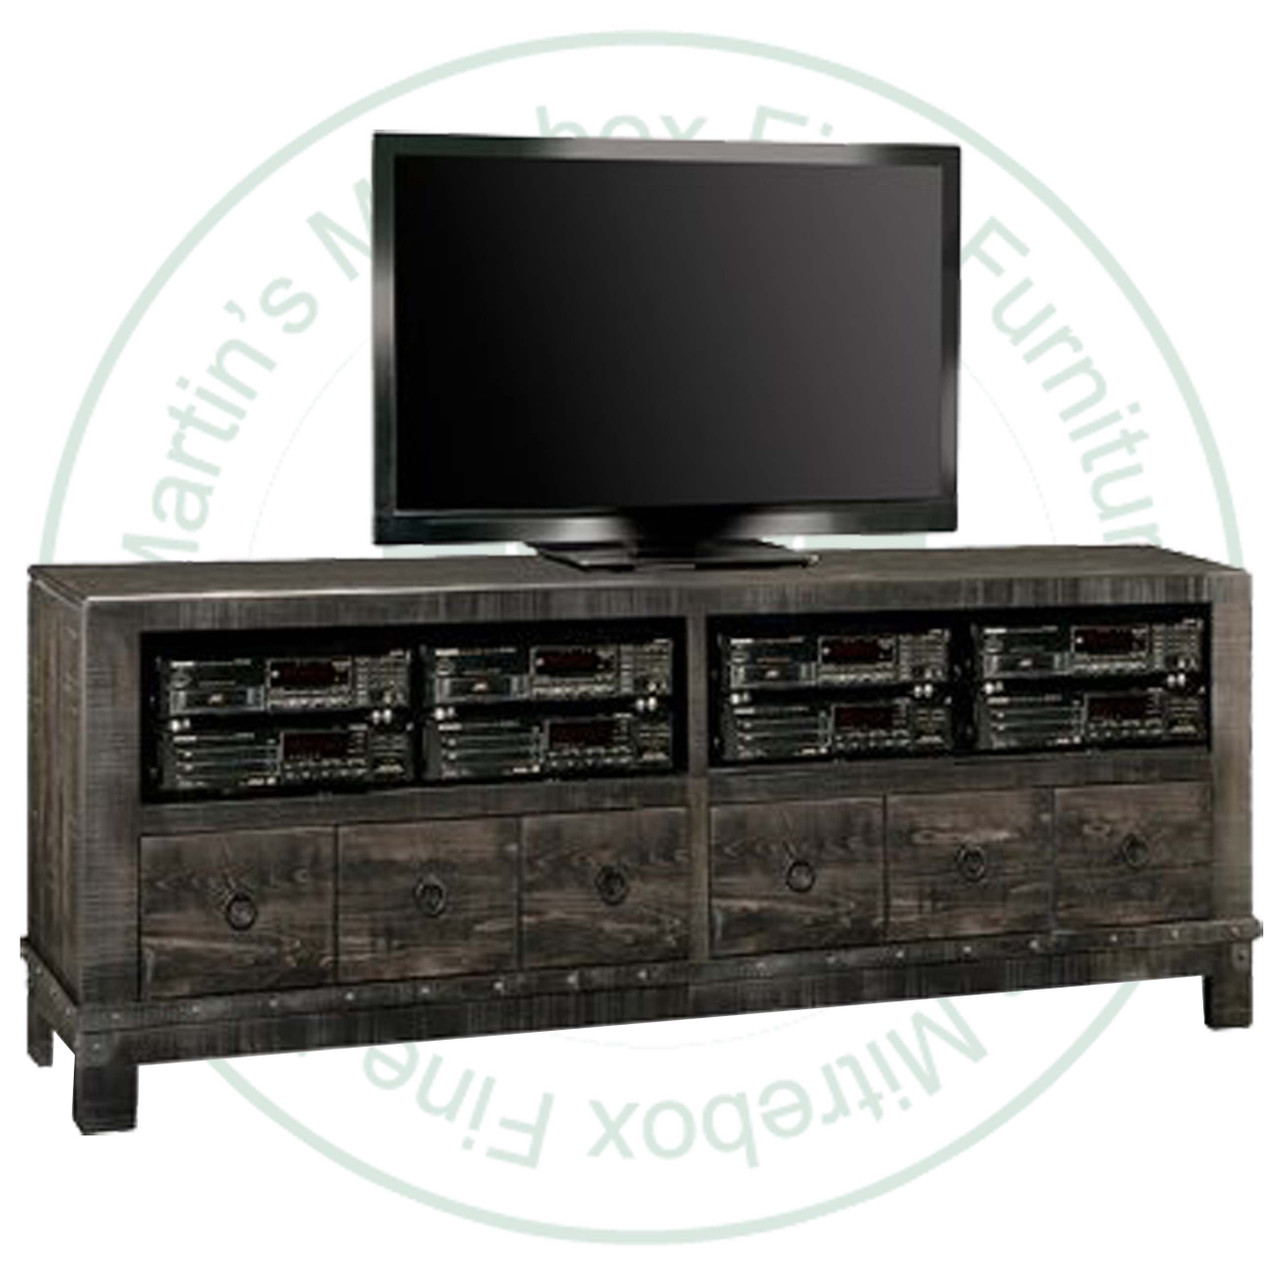 Maple Barrelworks HDTV Cabinet 19''D x 72''W x 26''H